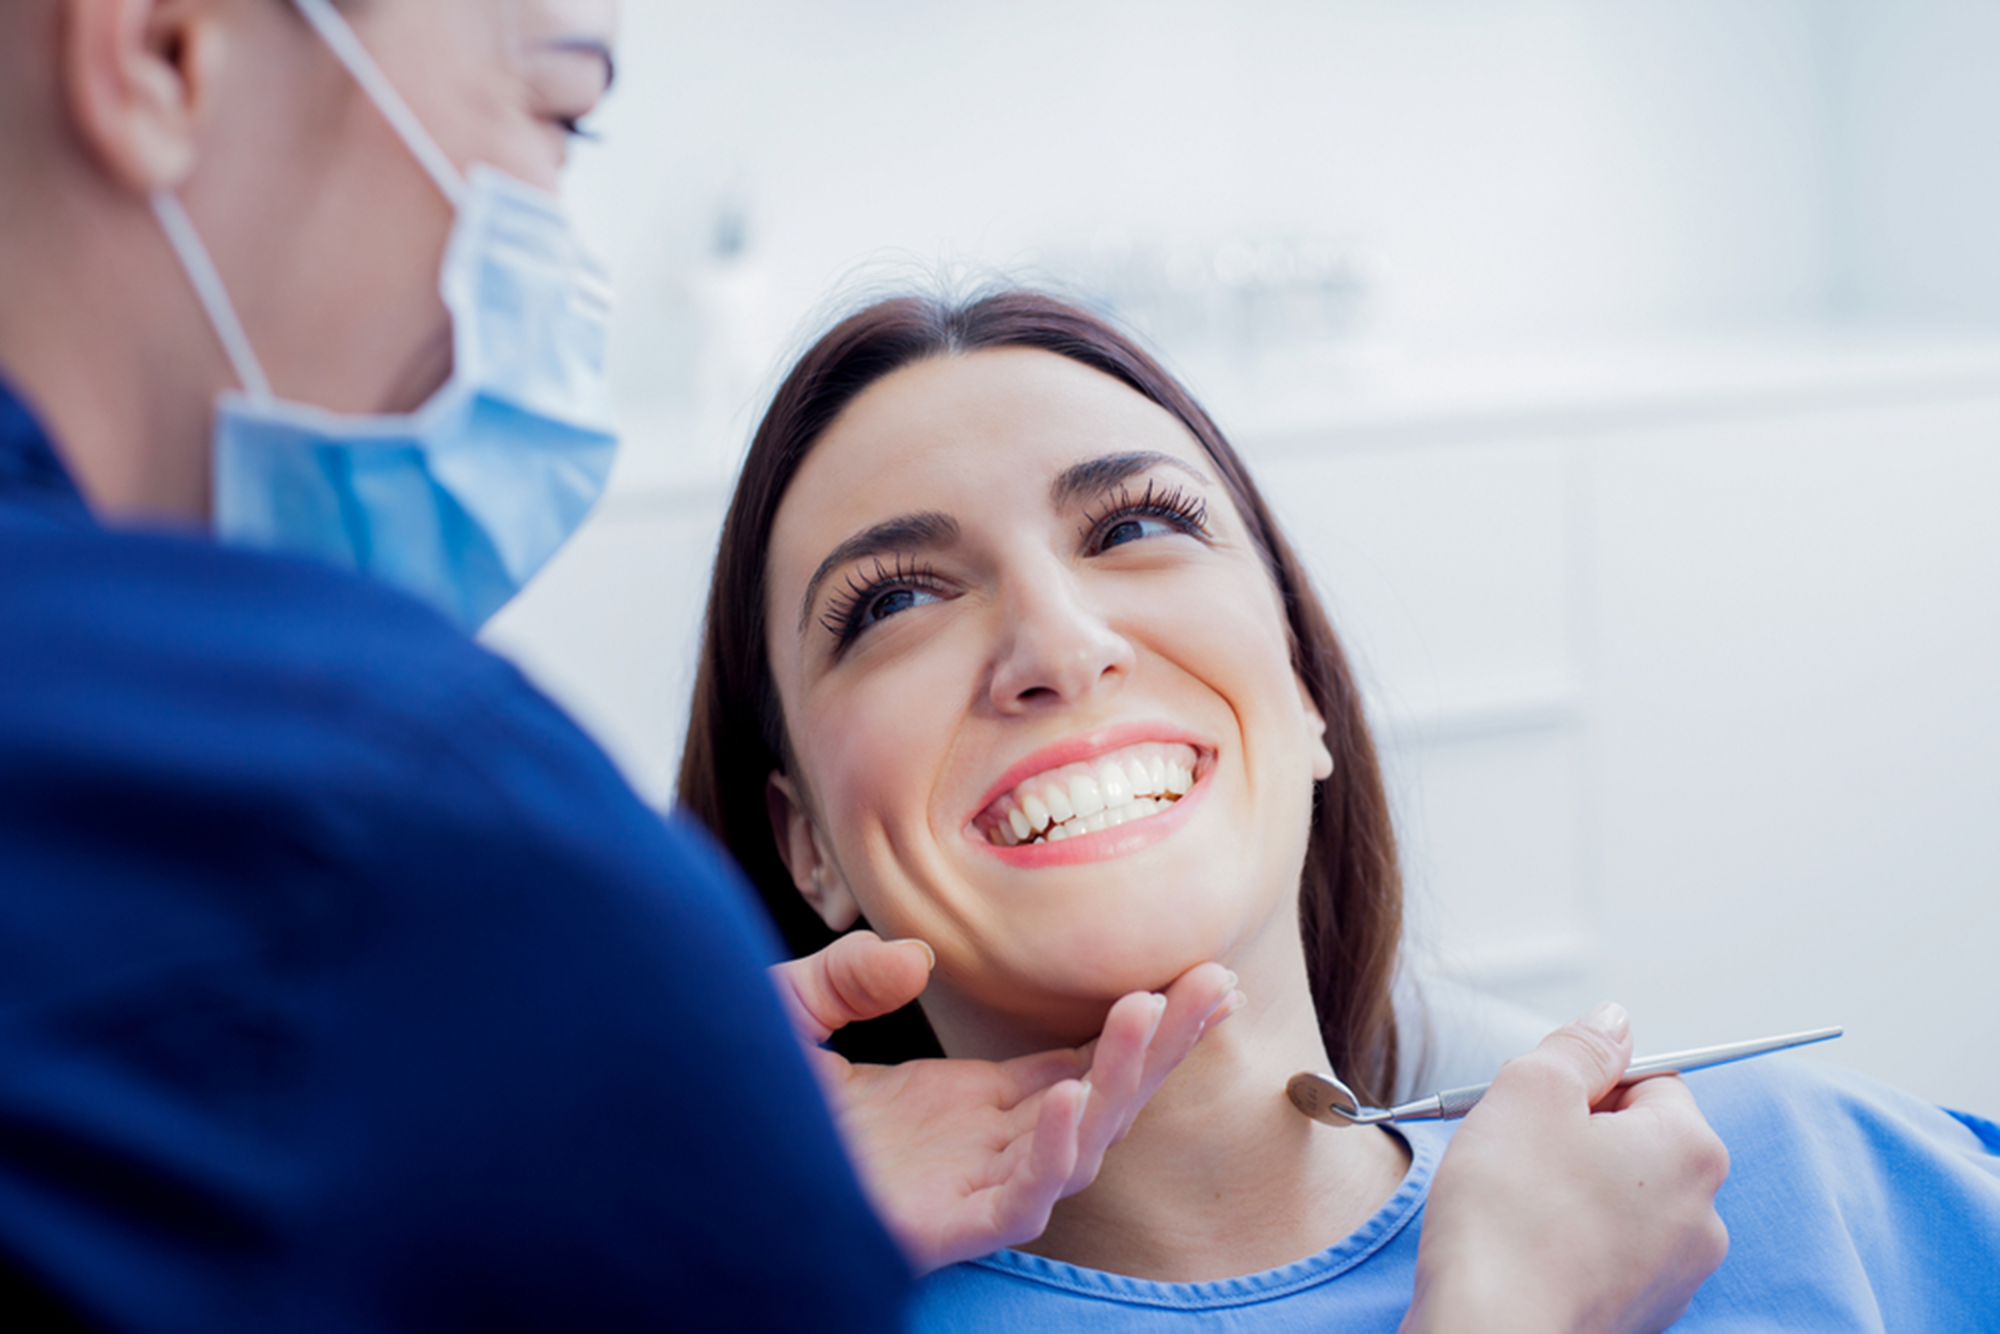 both adults and children benefit from regular dental exams